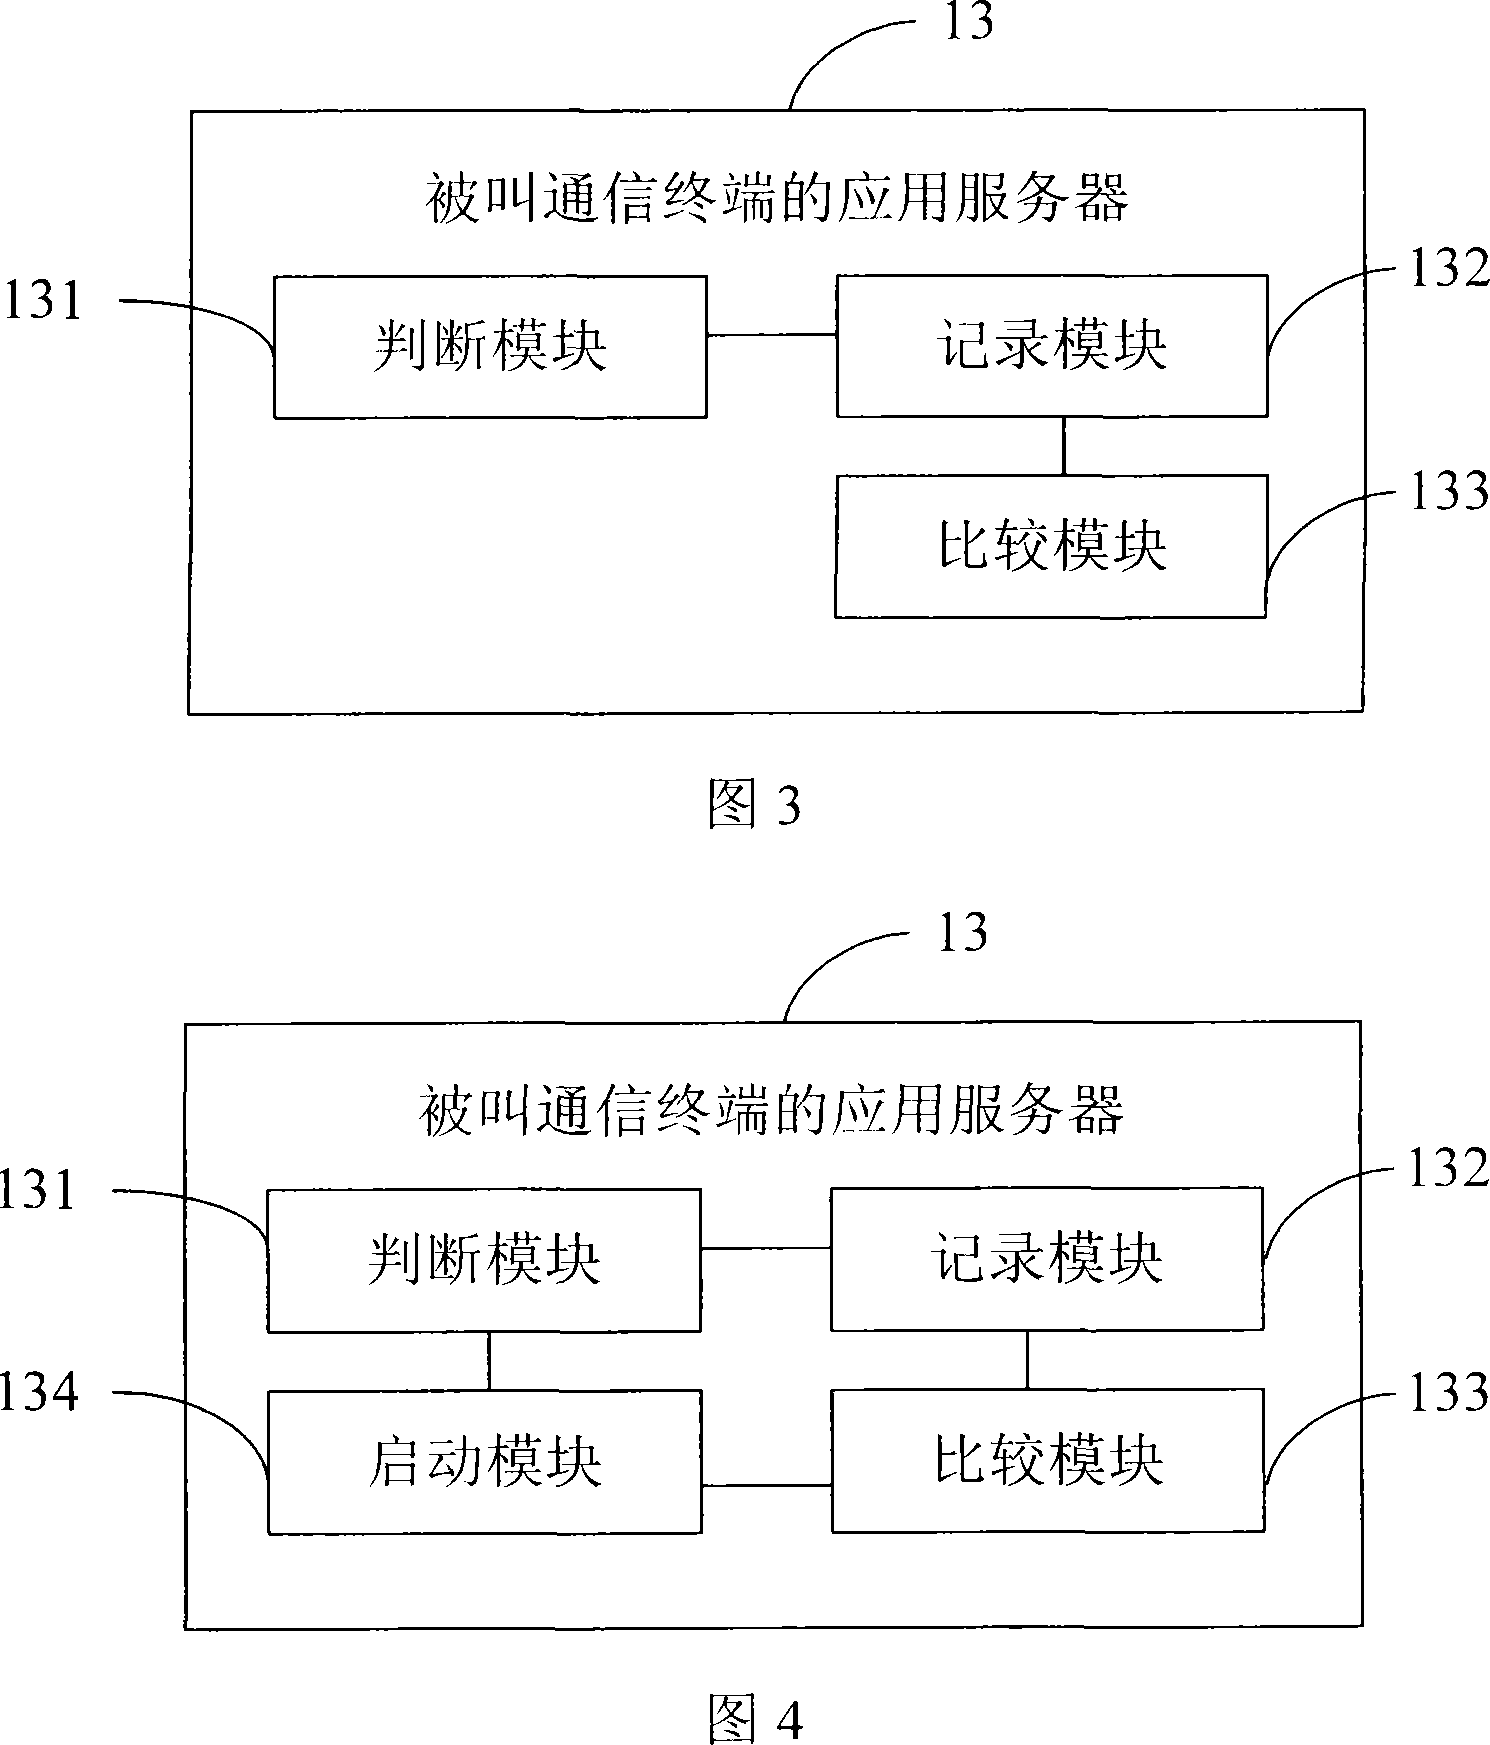 Method and system for preventing communication terminal sequence vibration service loop nesting